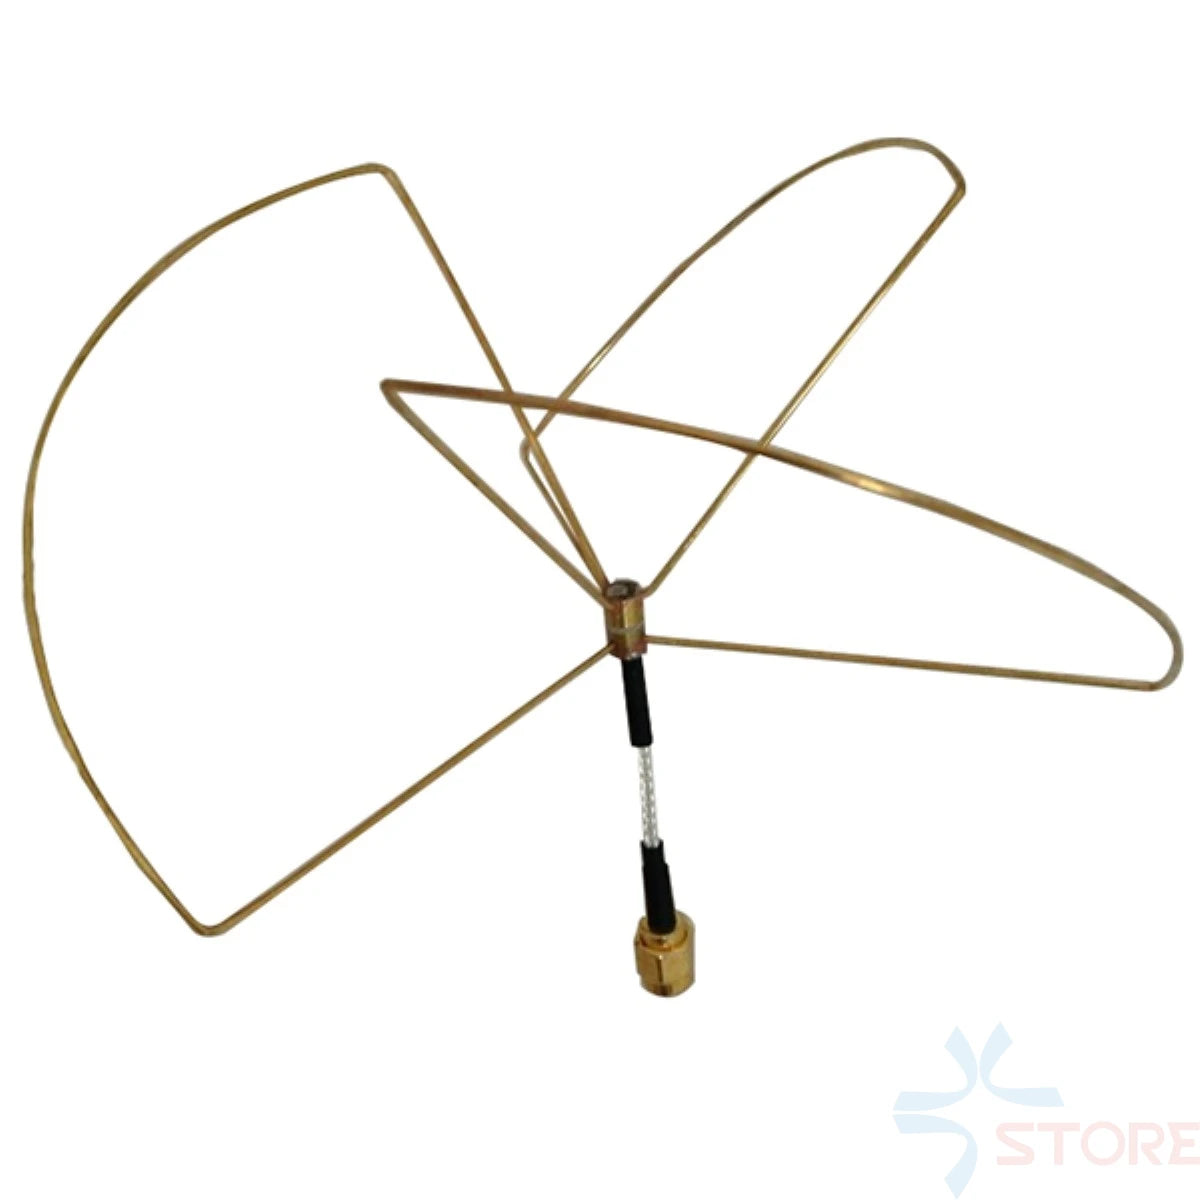 1.2G 1.2GHz Clover Leaf Antenna SPECIFICATIONS